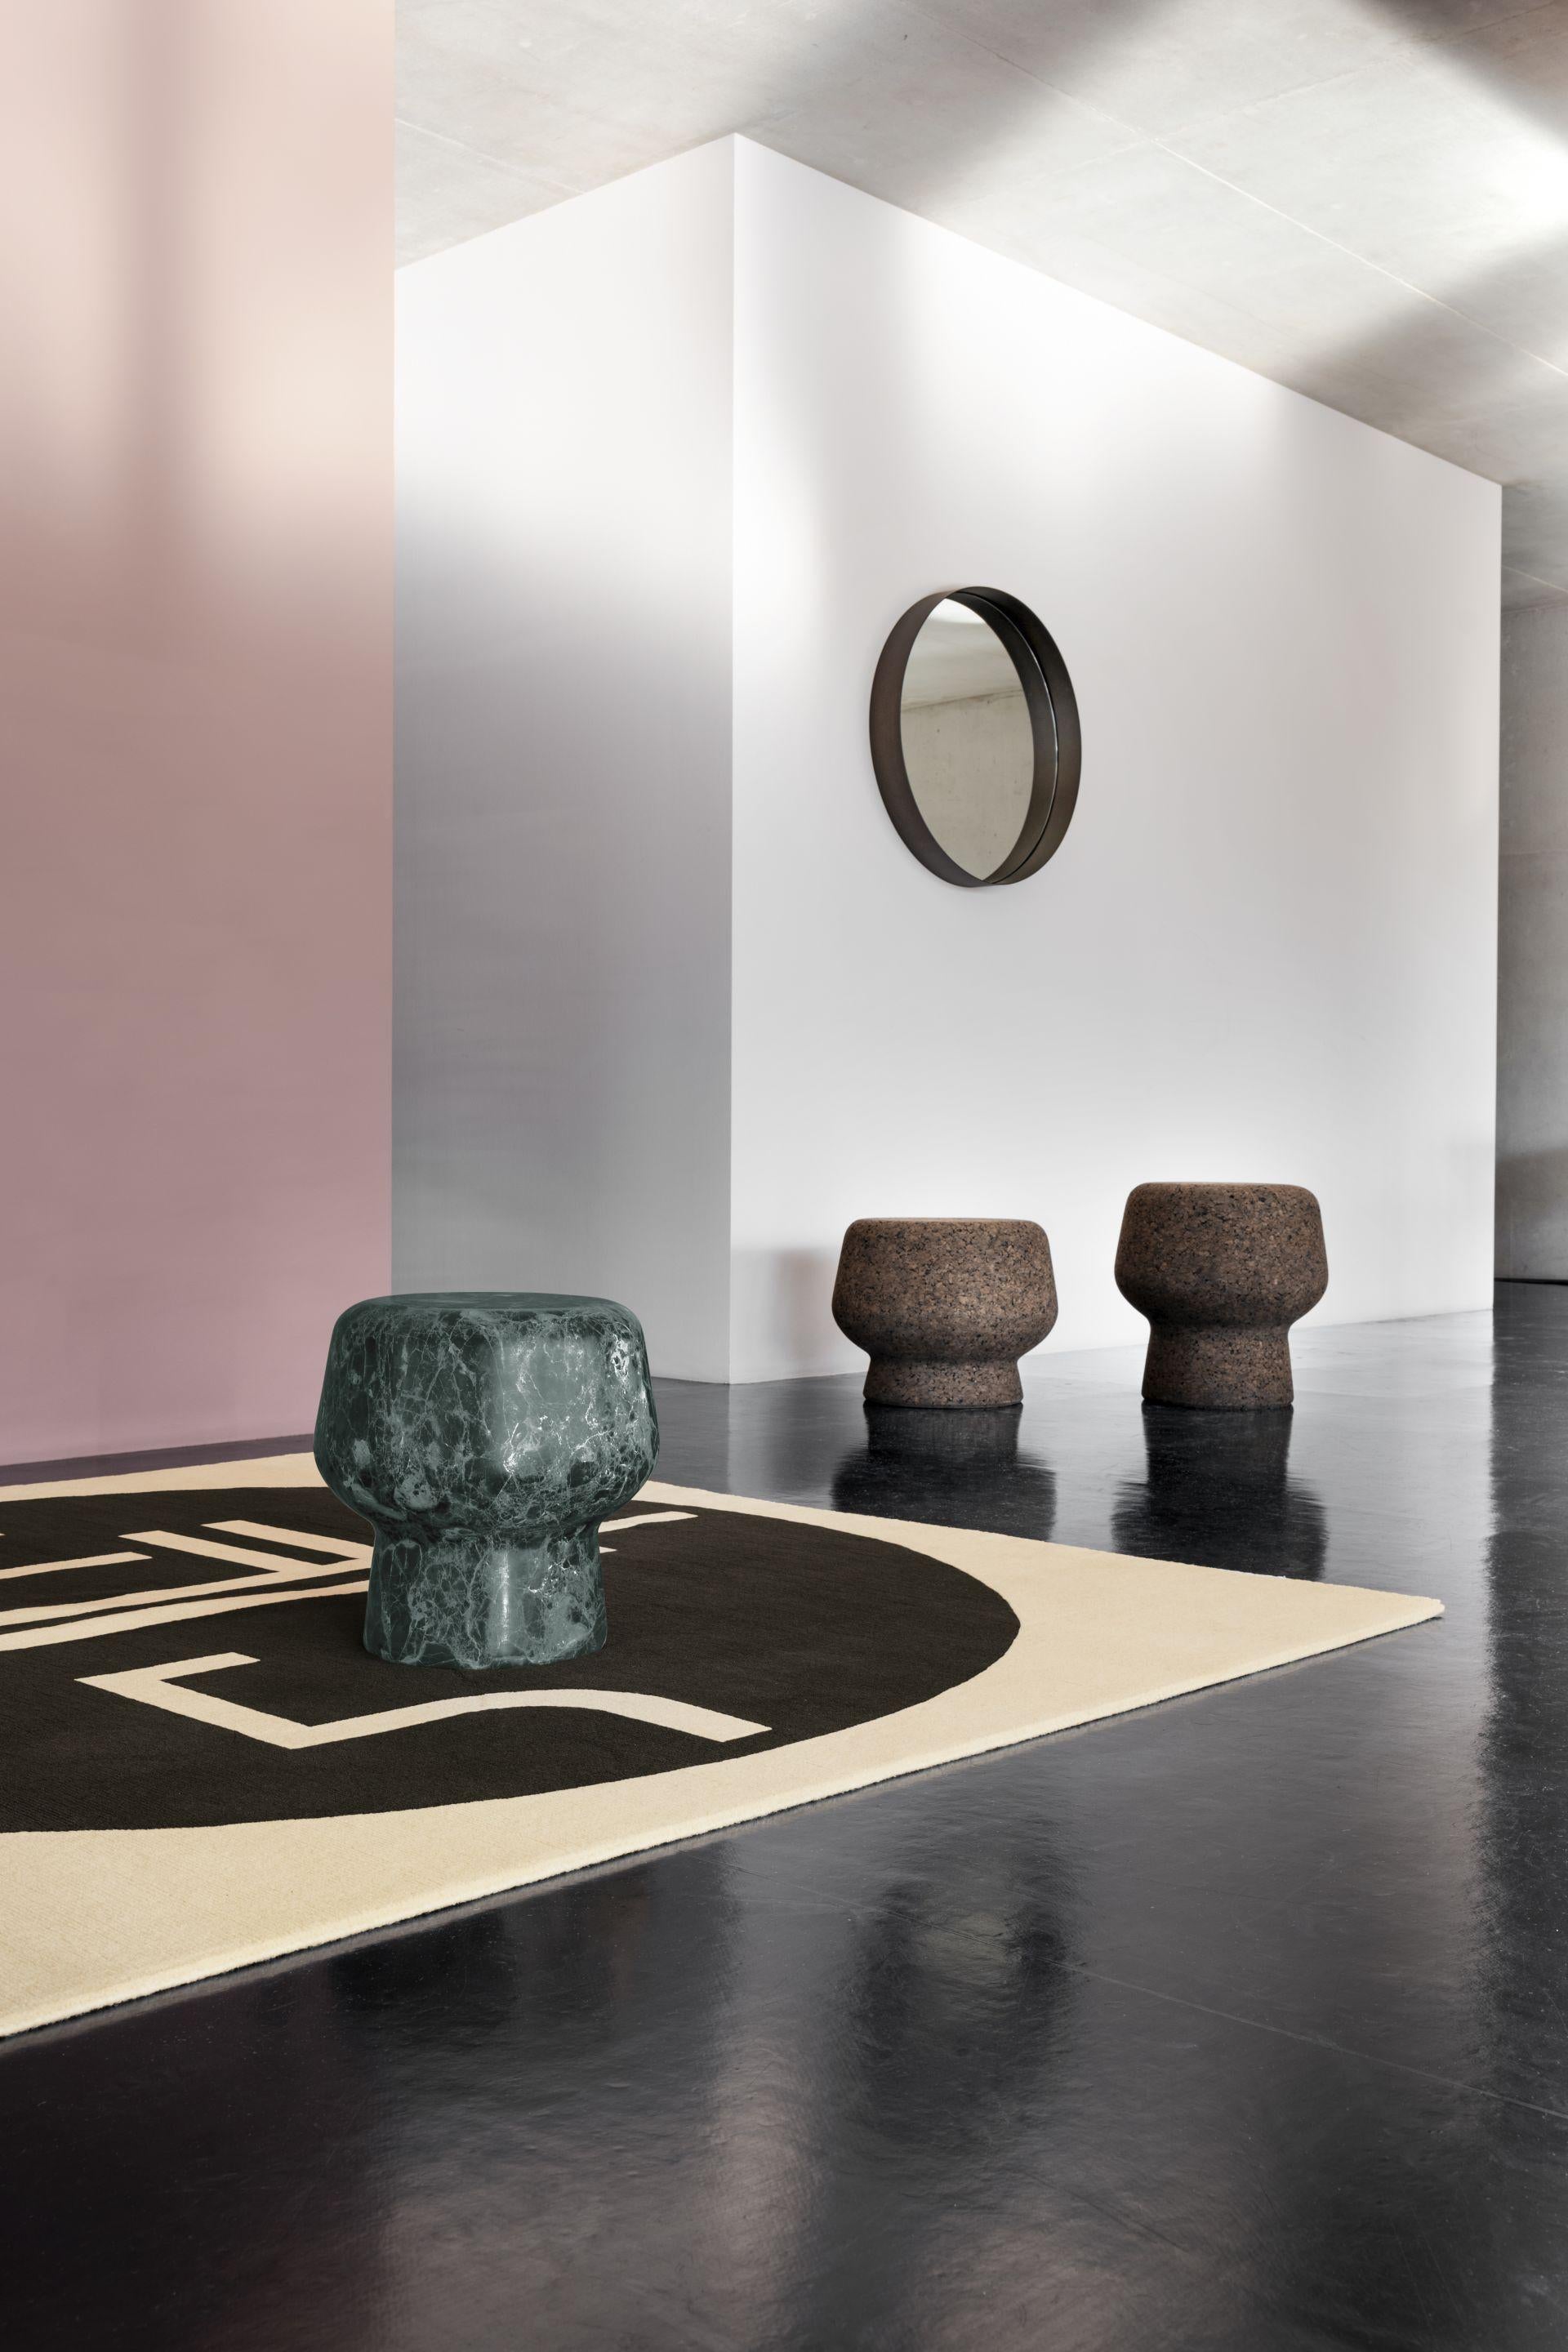 Stool or side table solid marble.
New introduction from MILAN 2023
Herzog & de Meuron are counted among the most innovative circle of international architectural offices. The architectural office regularly attracts great attention from media with